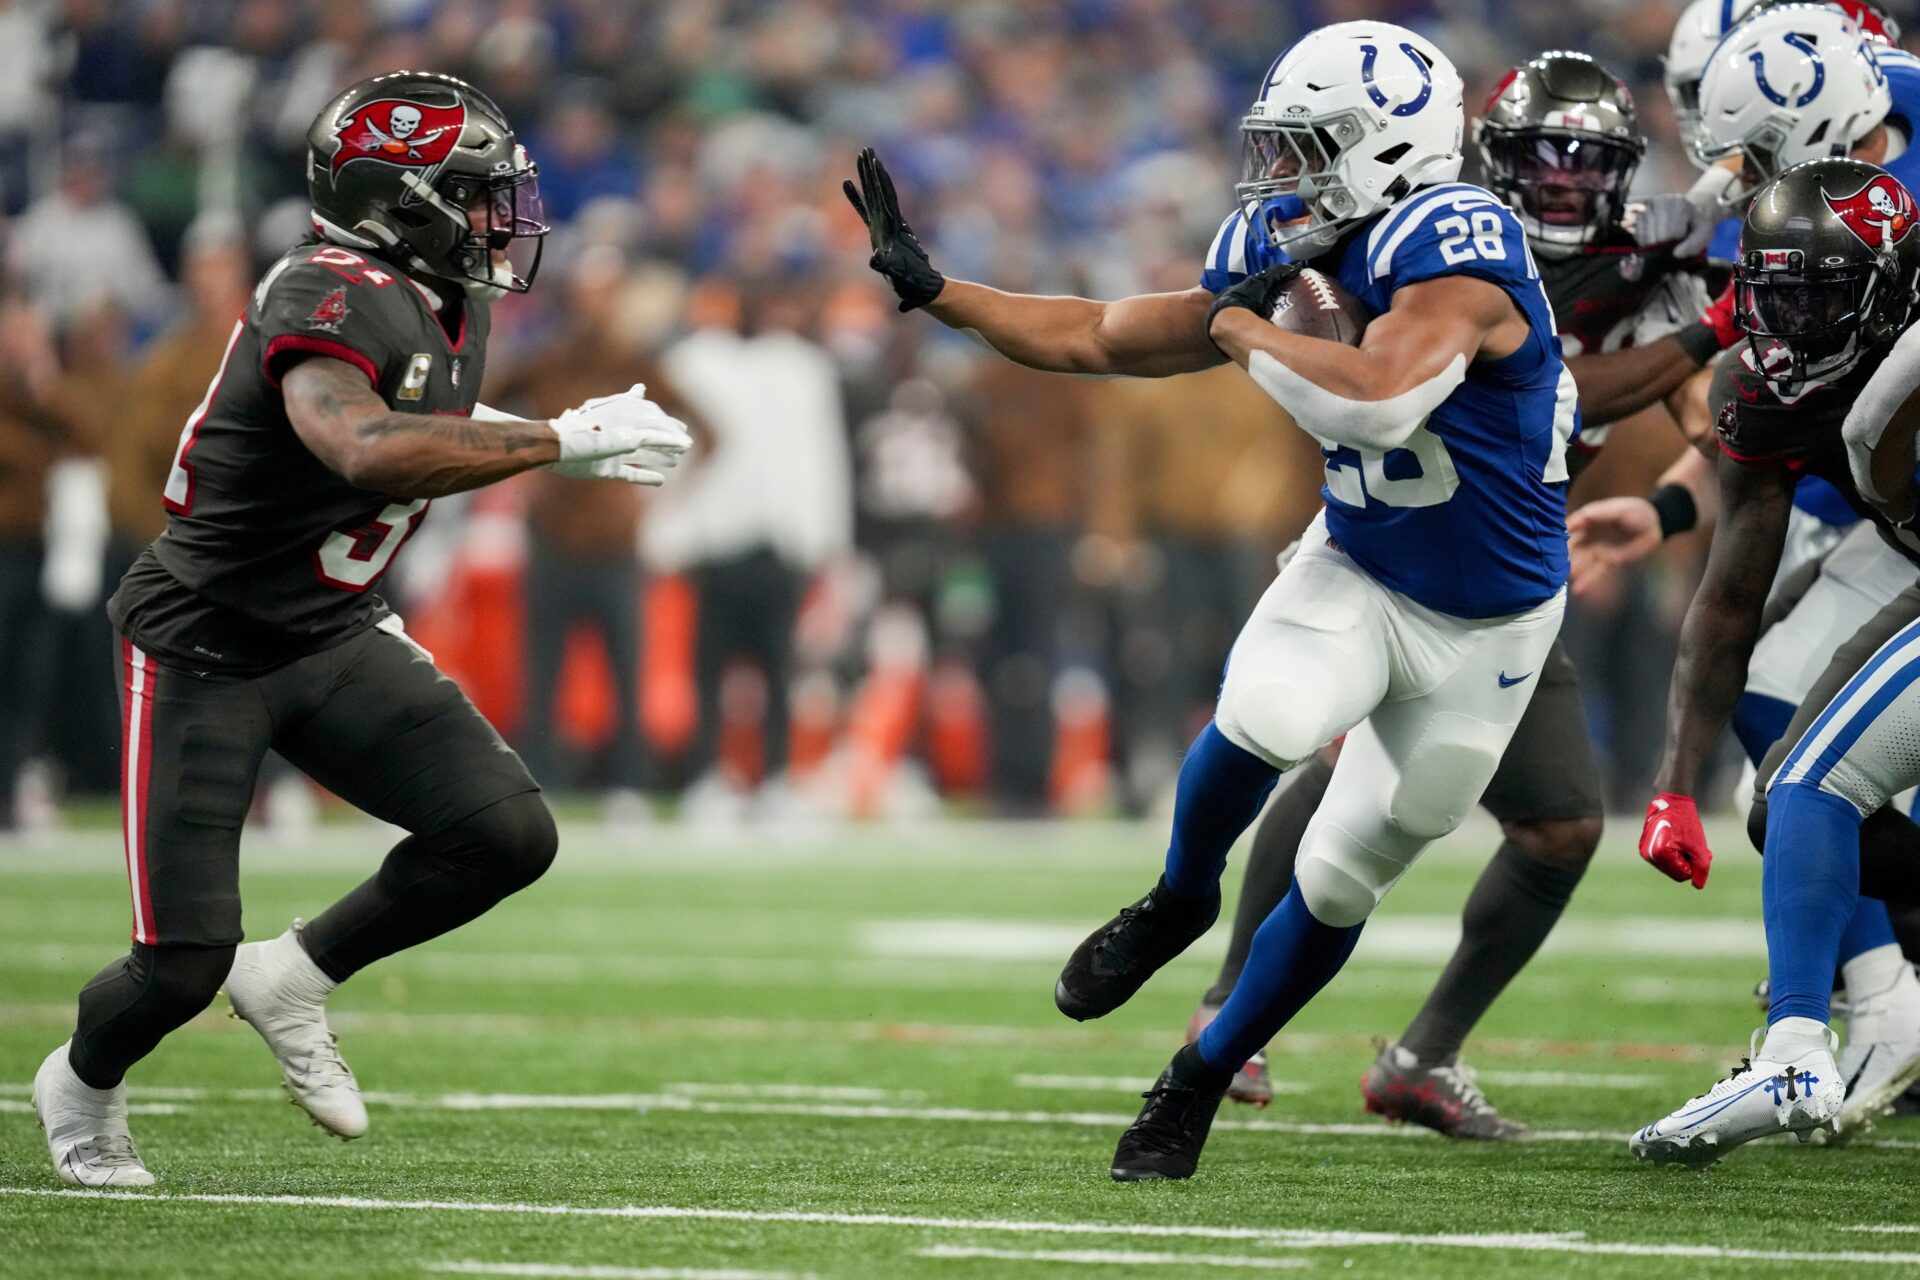 Indianapolis Colts RB Jonathan Taylor (28) runs the ball against the Tampa Bay Buccaneers.